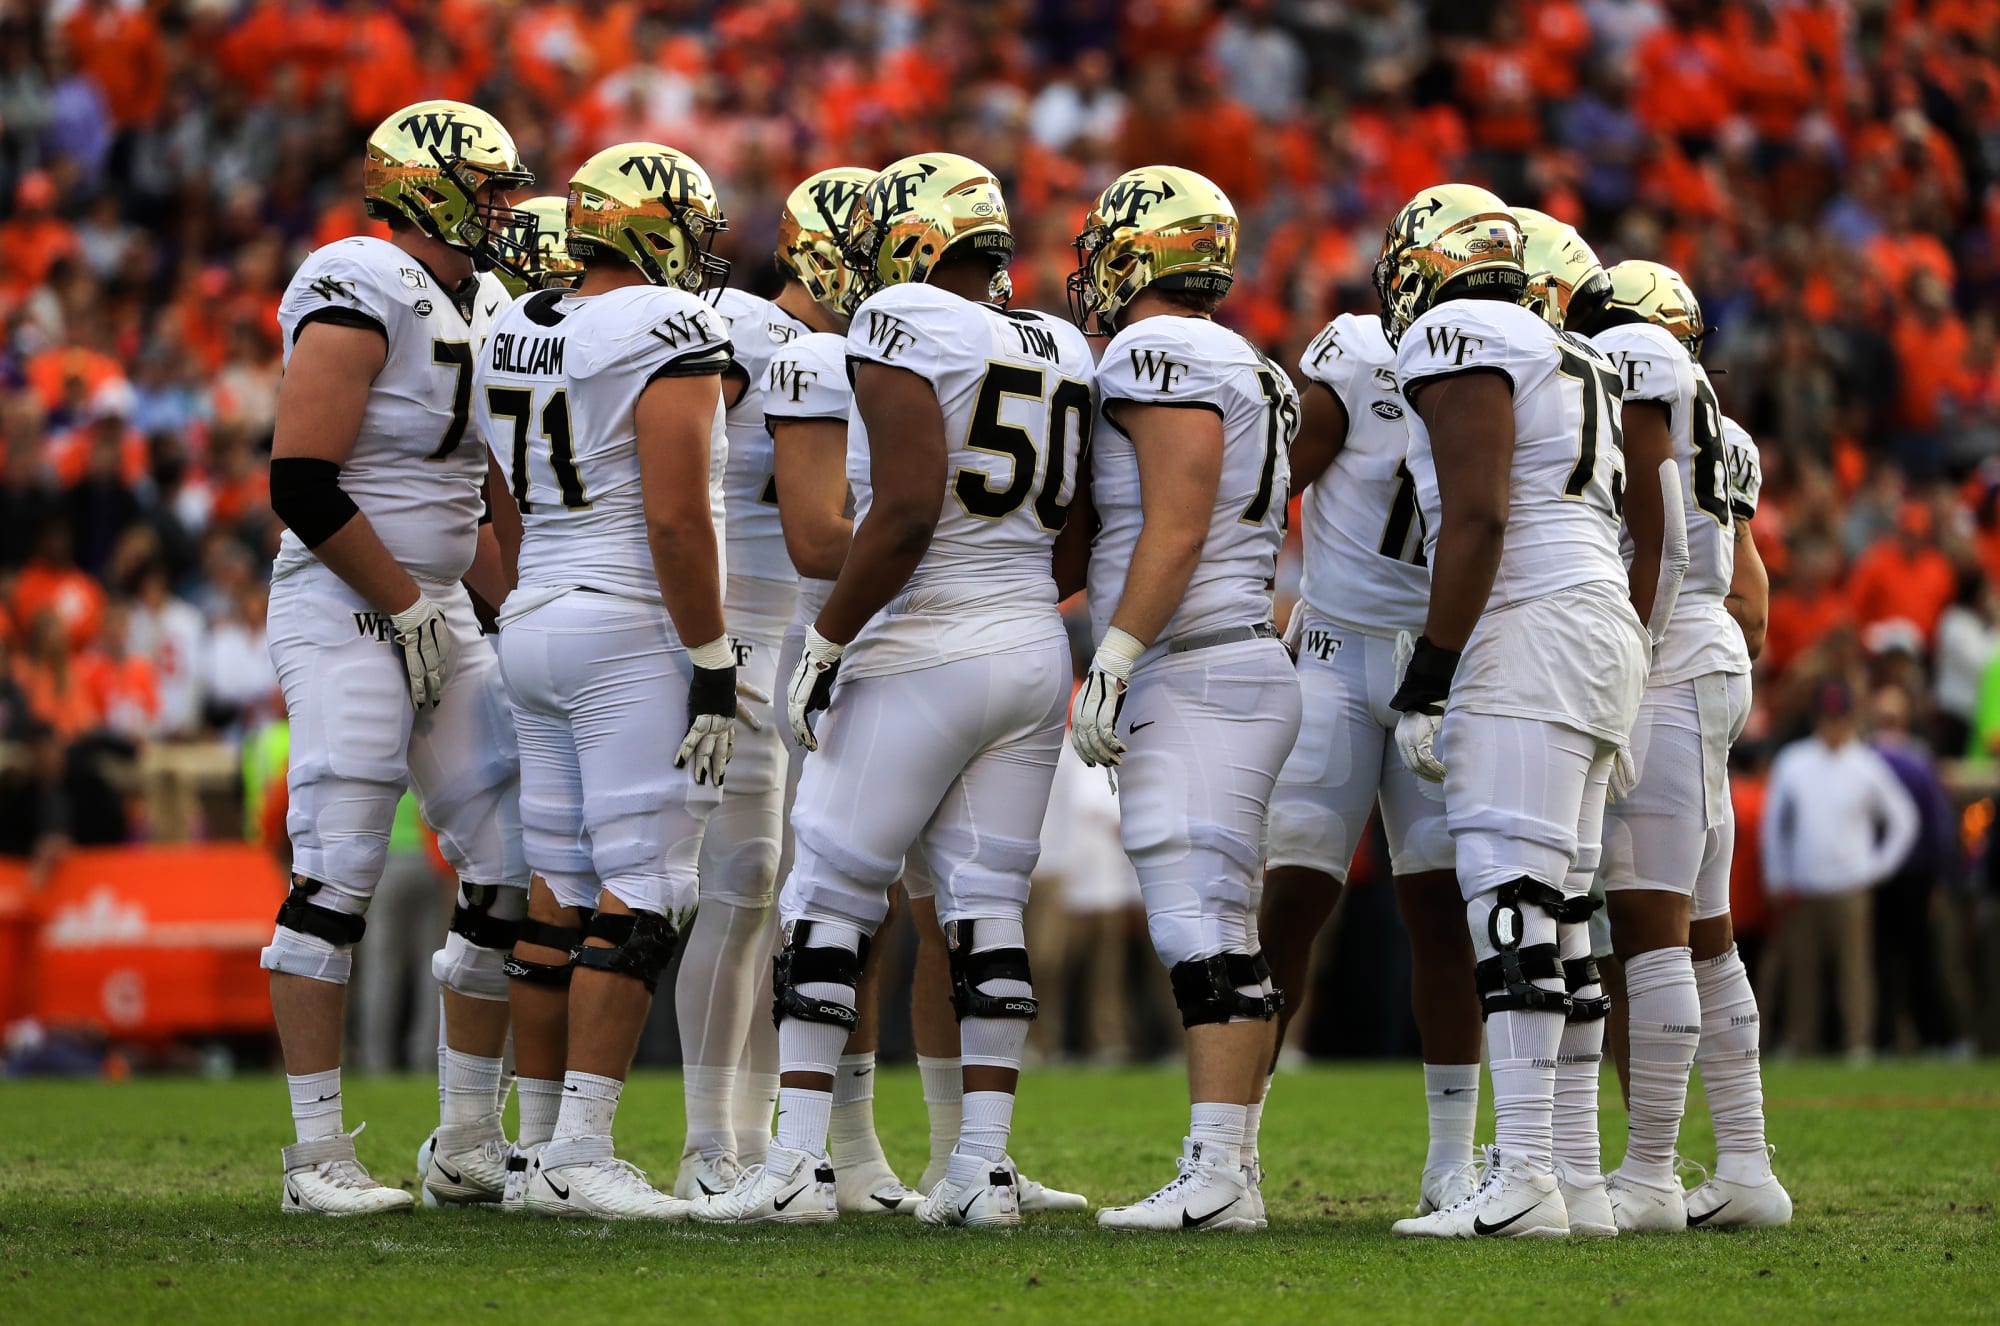 Wake Forest football face uphill battle to make fifth straight bowl game